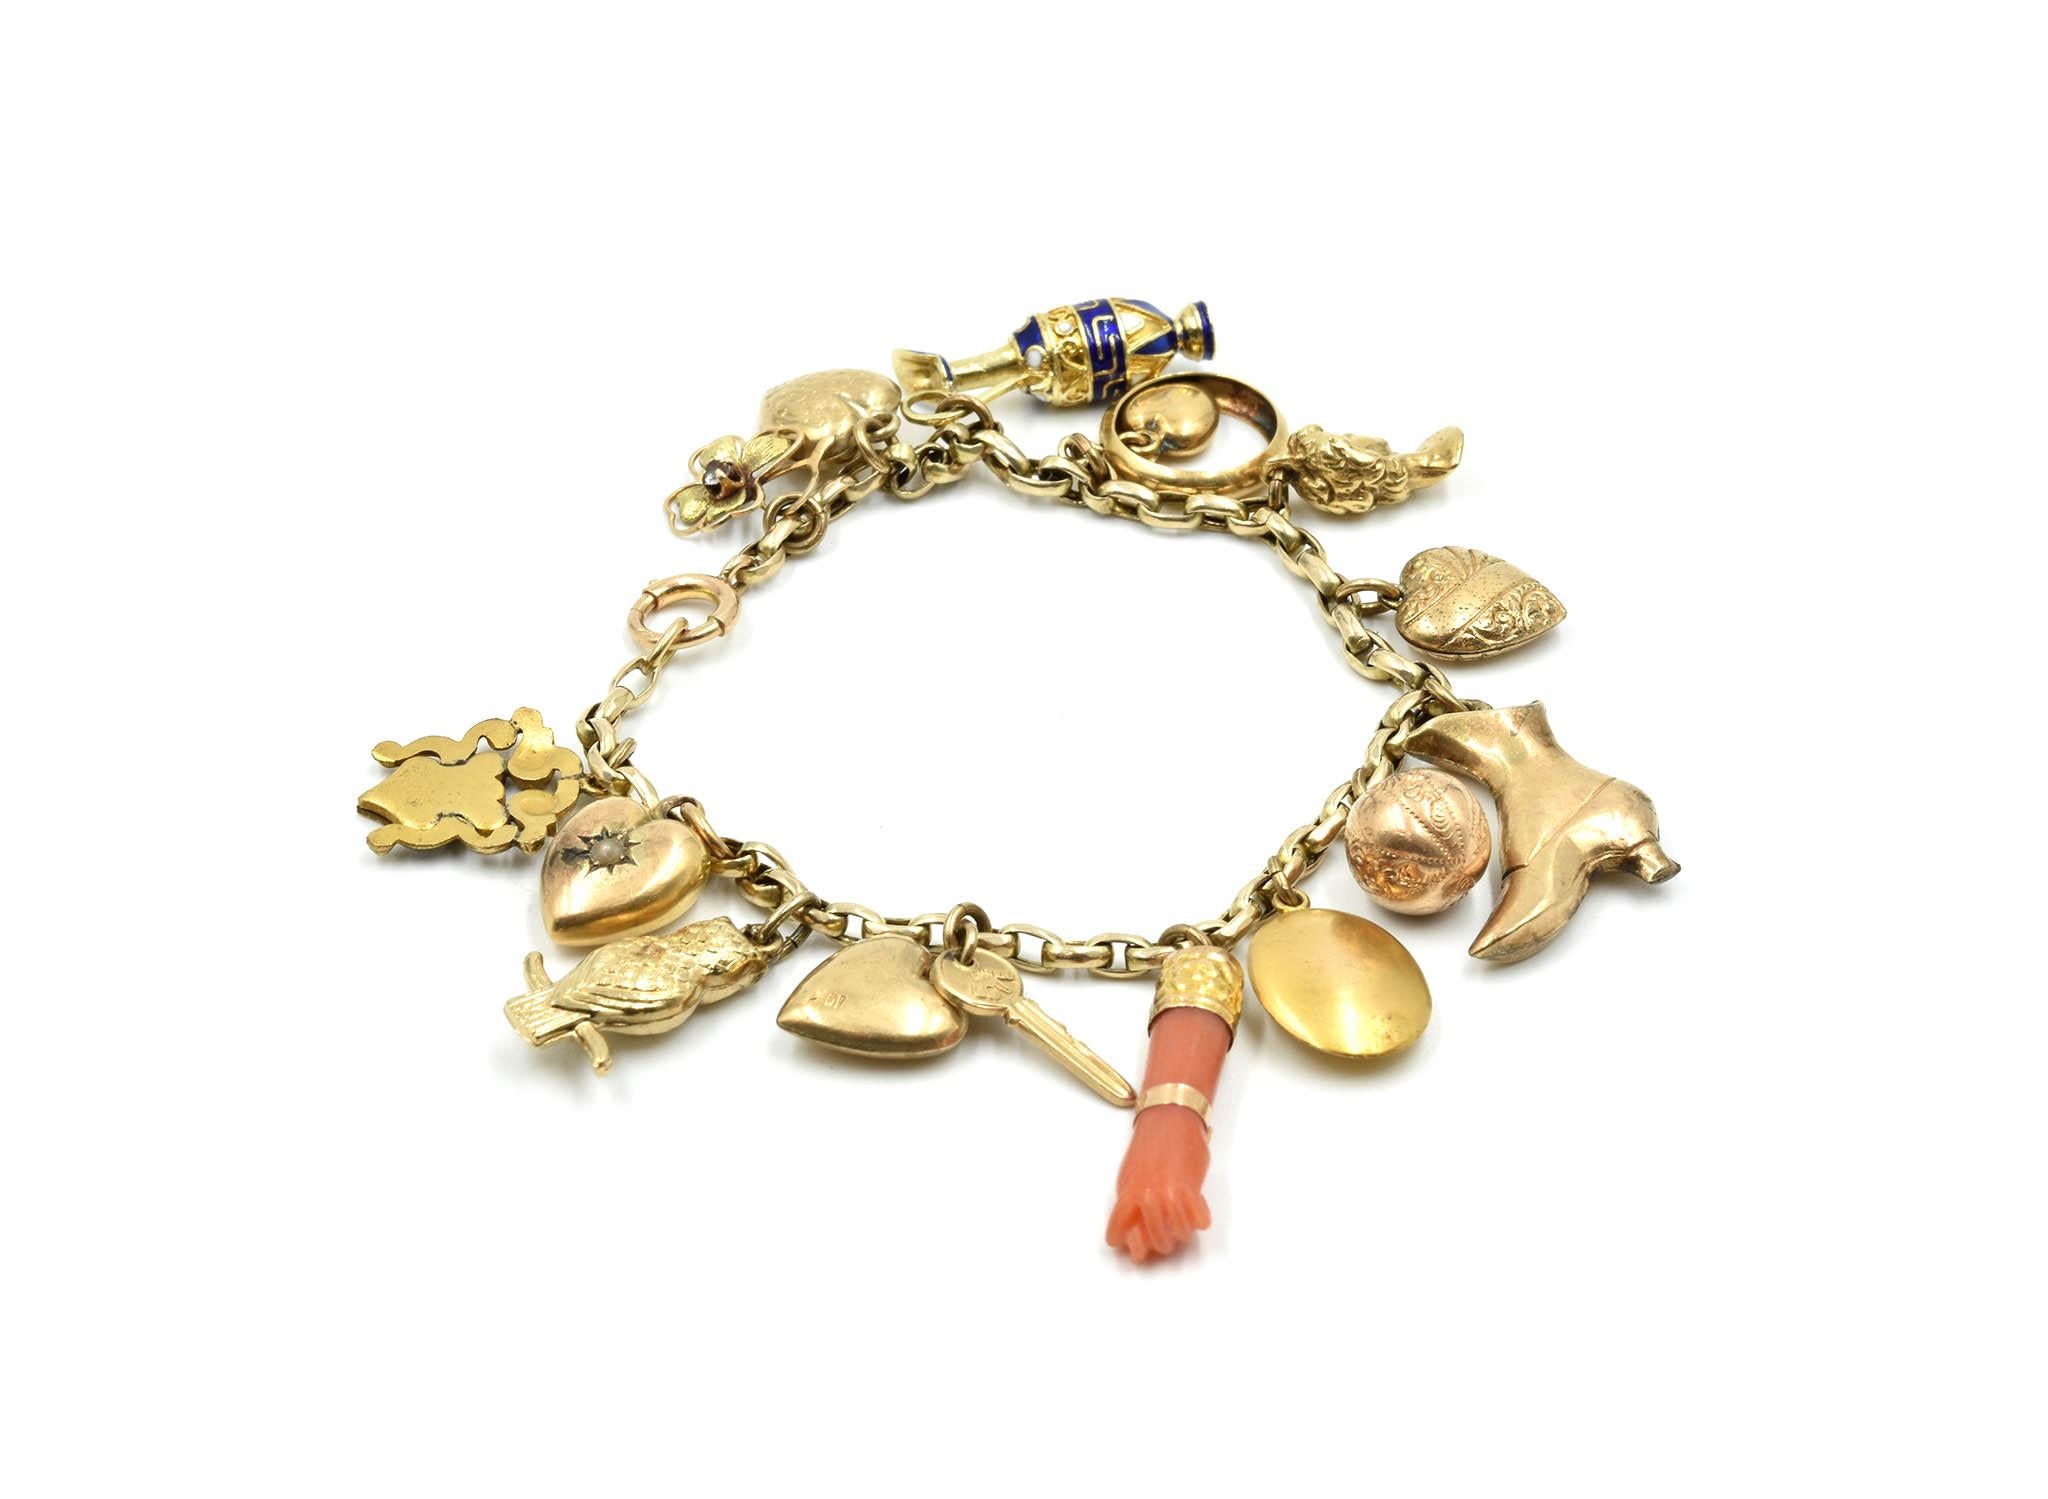 This stunning vintage charm bracelet is made in 14k and 10k yellow gold. The bracelet is 10k yellow gold and the charms on the bracelet dangle from the oval links are crafted in both 14k and 10k yellow gold. The charms include hearts, flowers,